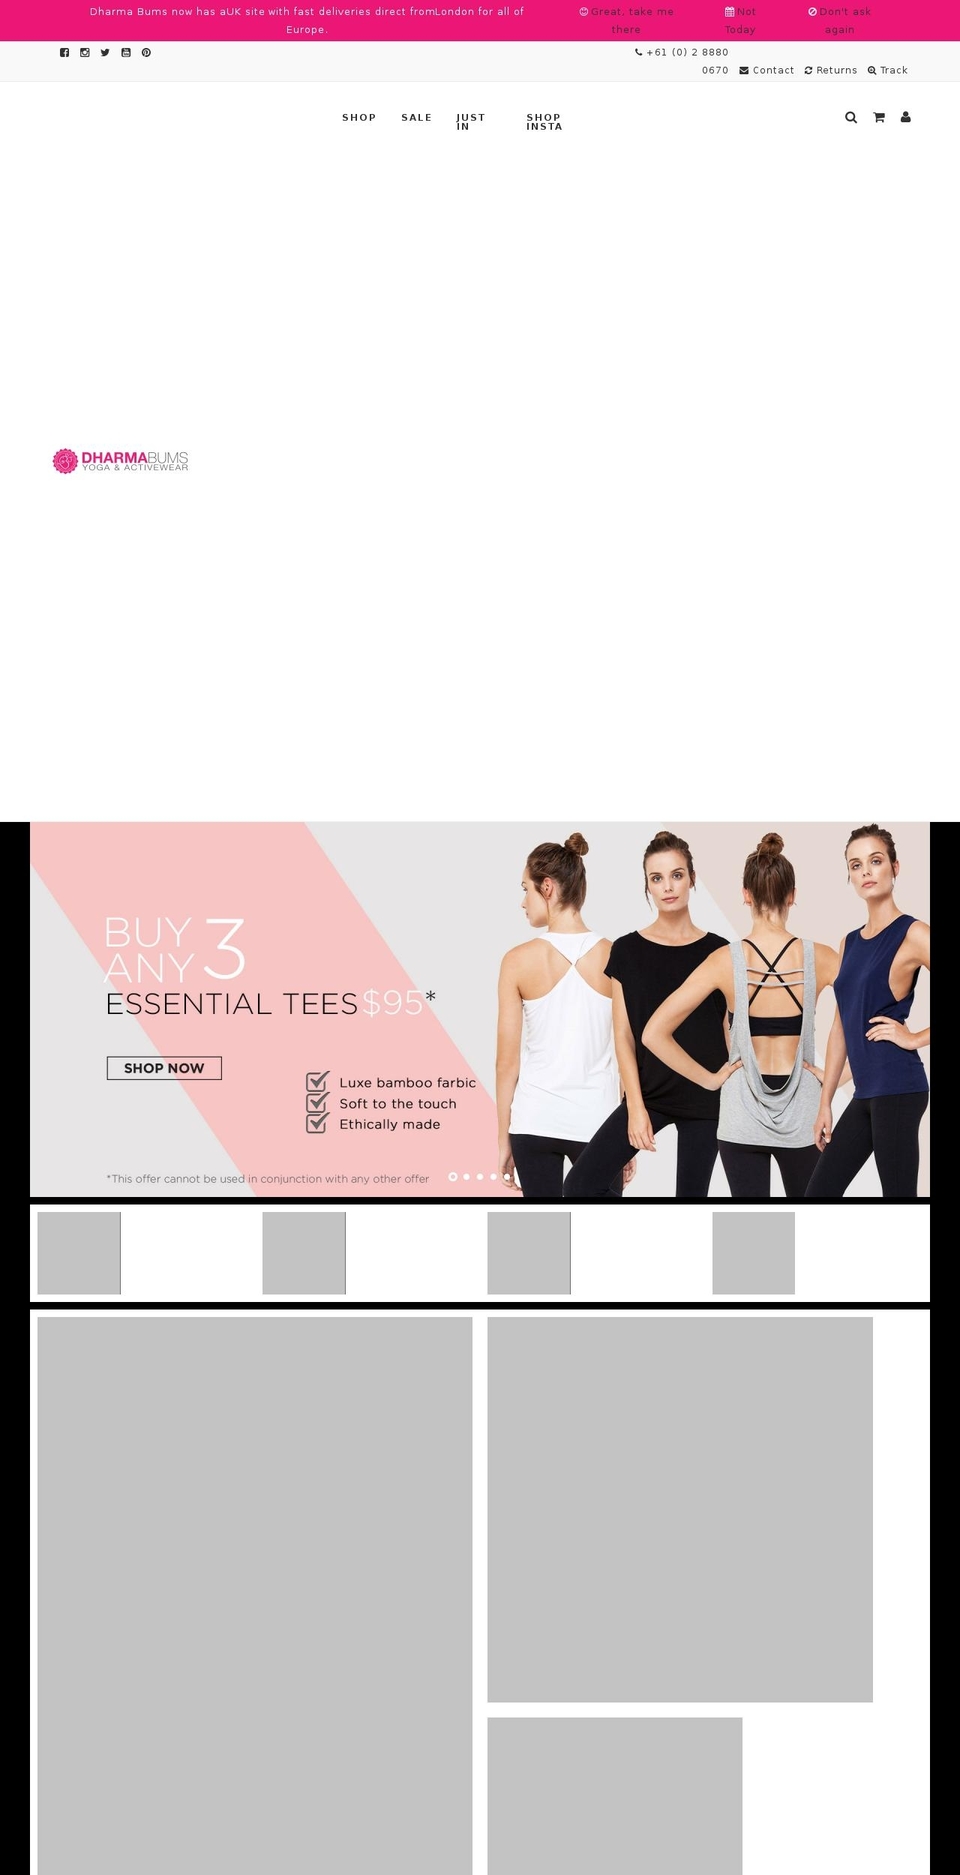 New Collection - Sept Shopify theme site example dharmabums.com.au